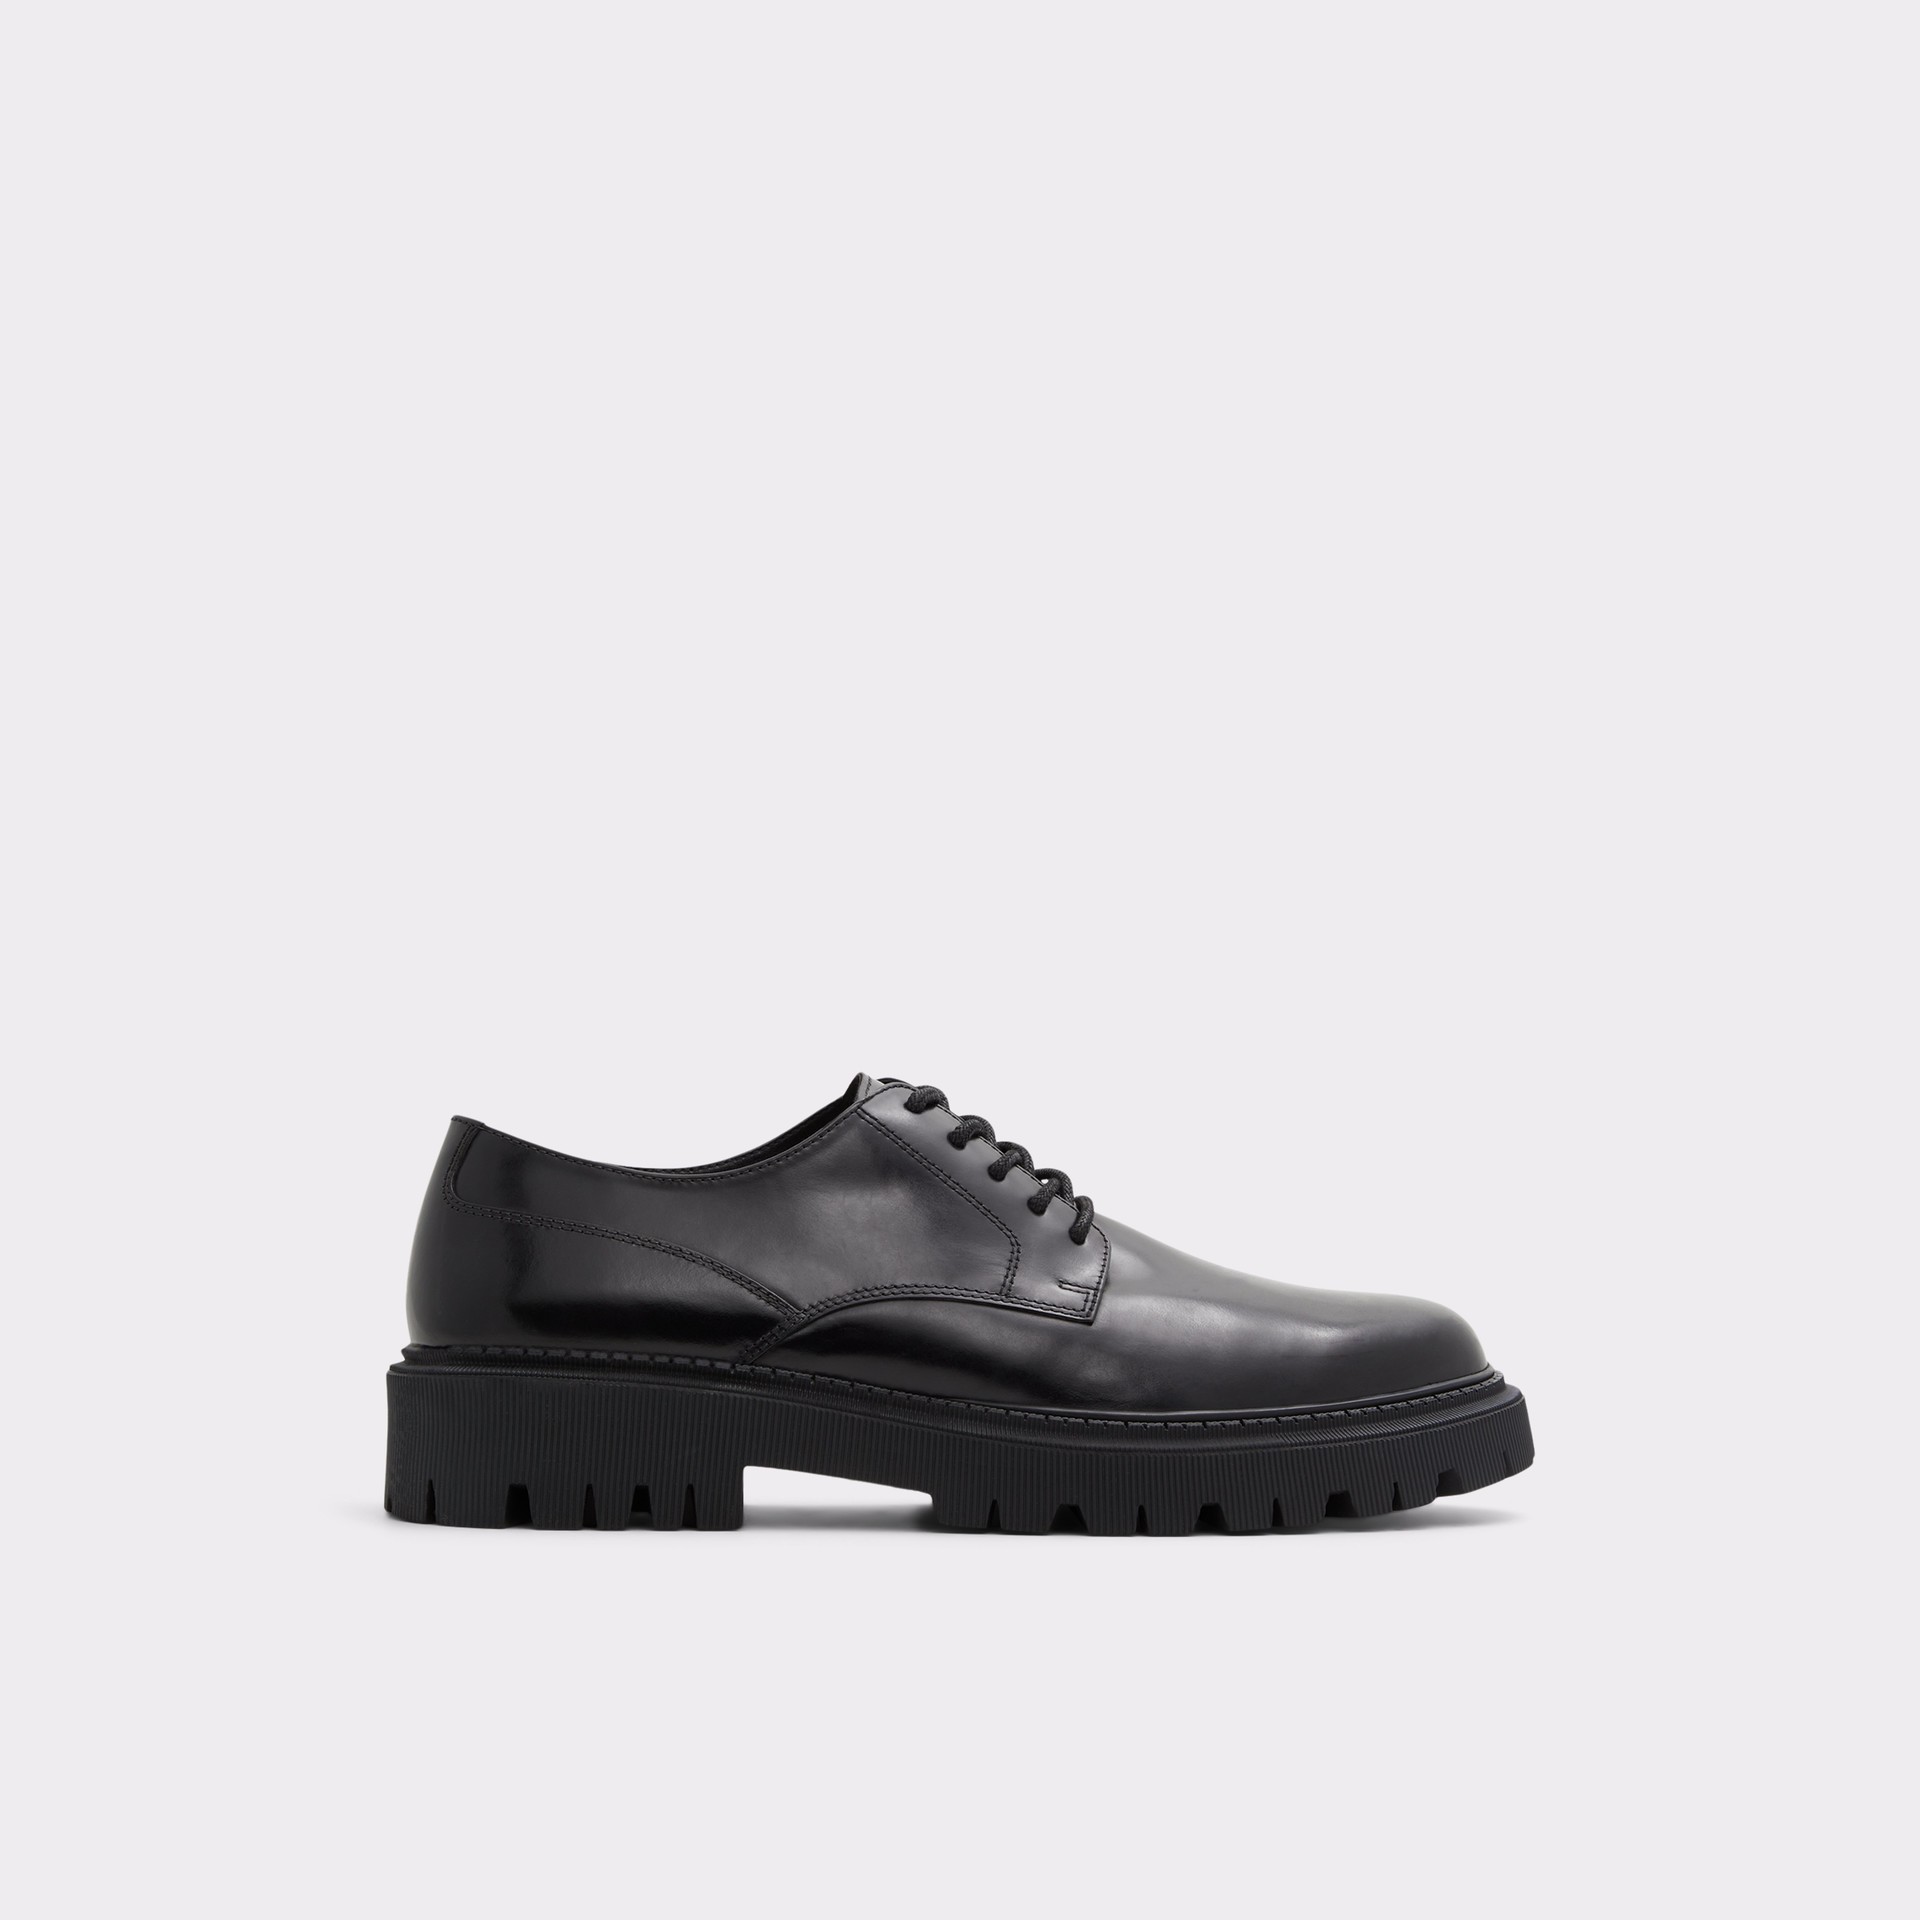 Man shoes in leather in black SEGAL | ALDO Shoes Cyprus